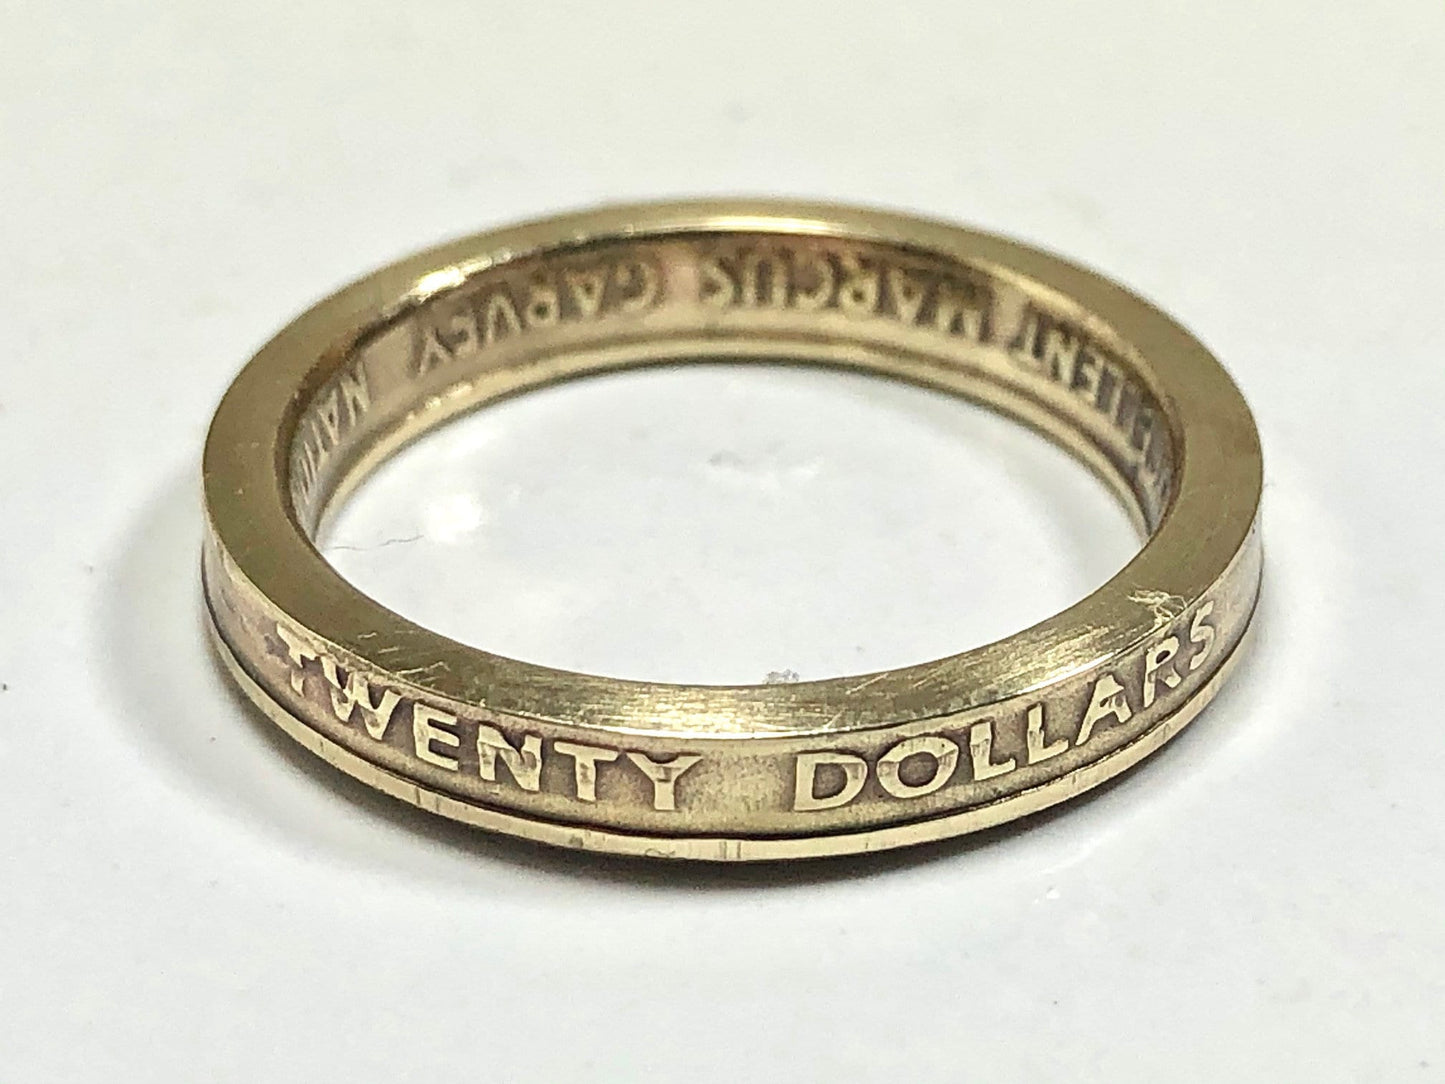 Jamaica Coin Ring Jamaican Twenty Dollar Handmade Personal Jewelry Ring Gift For Friend Coin Ring Gift For Him Her World Coin Collector